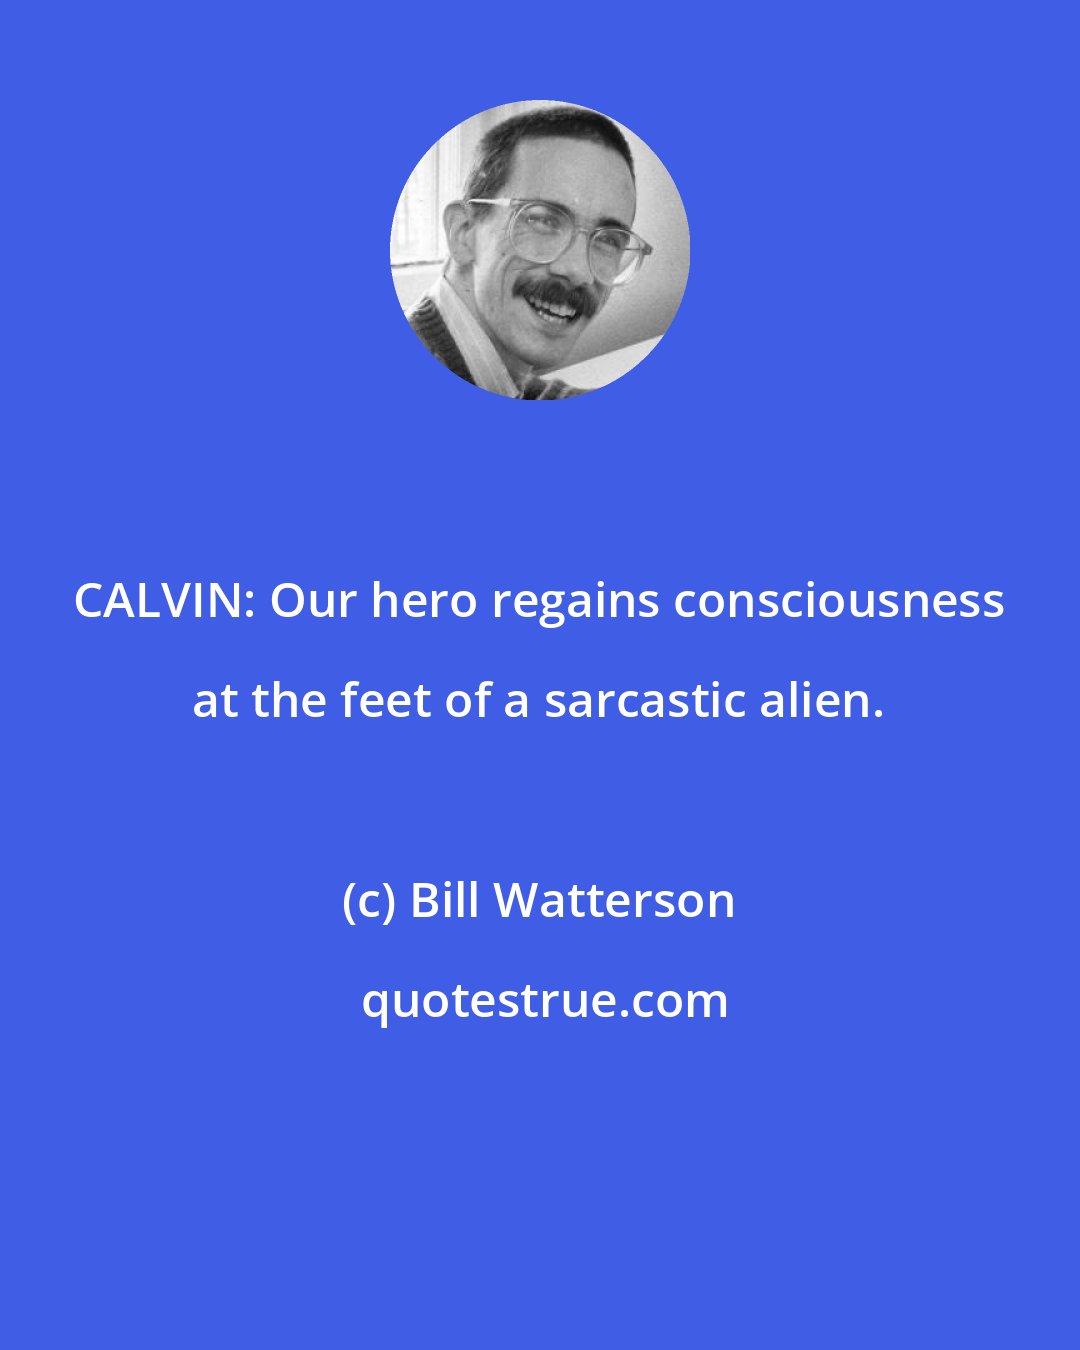 Bill Watterson: CALVIN: Our hero regains consciousness at the feet of a sarcastic alien.